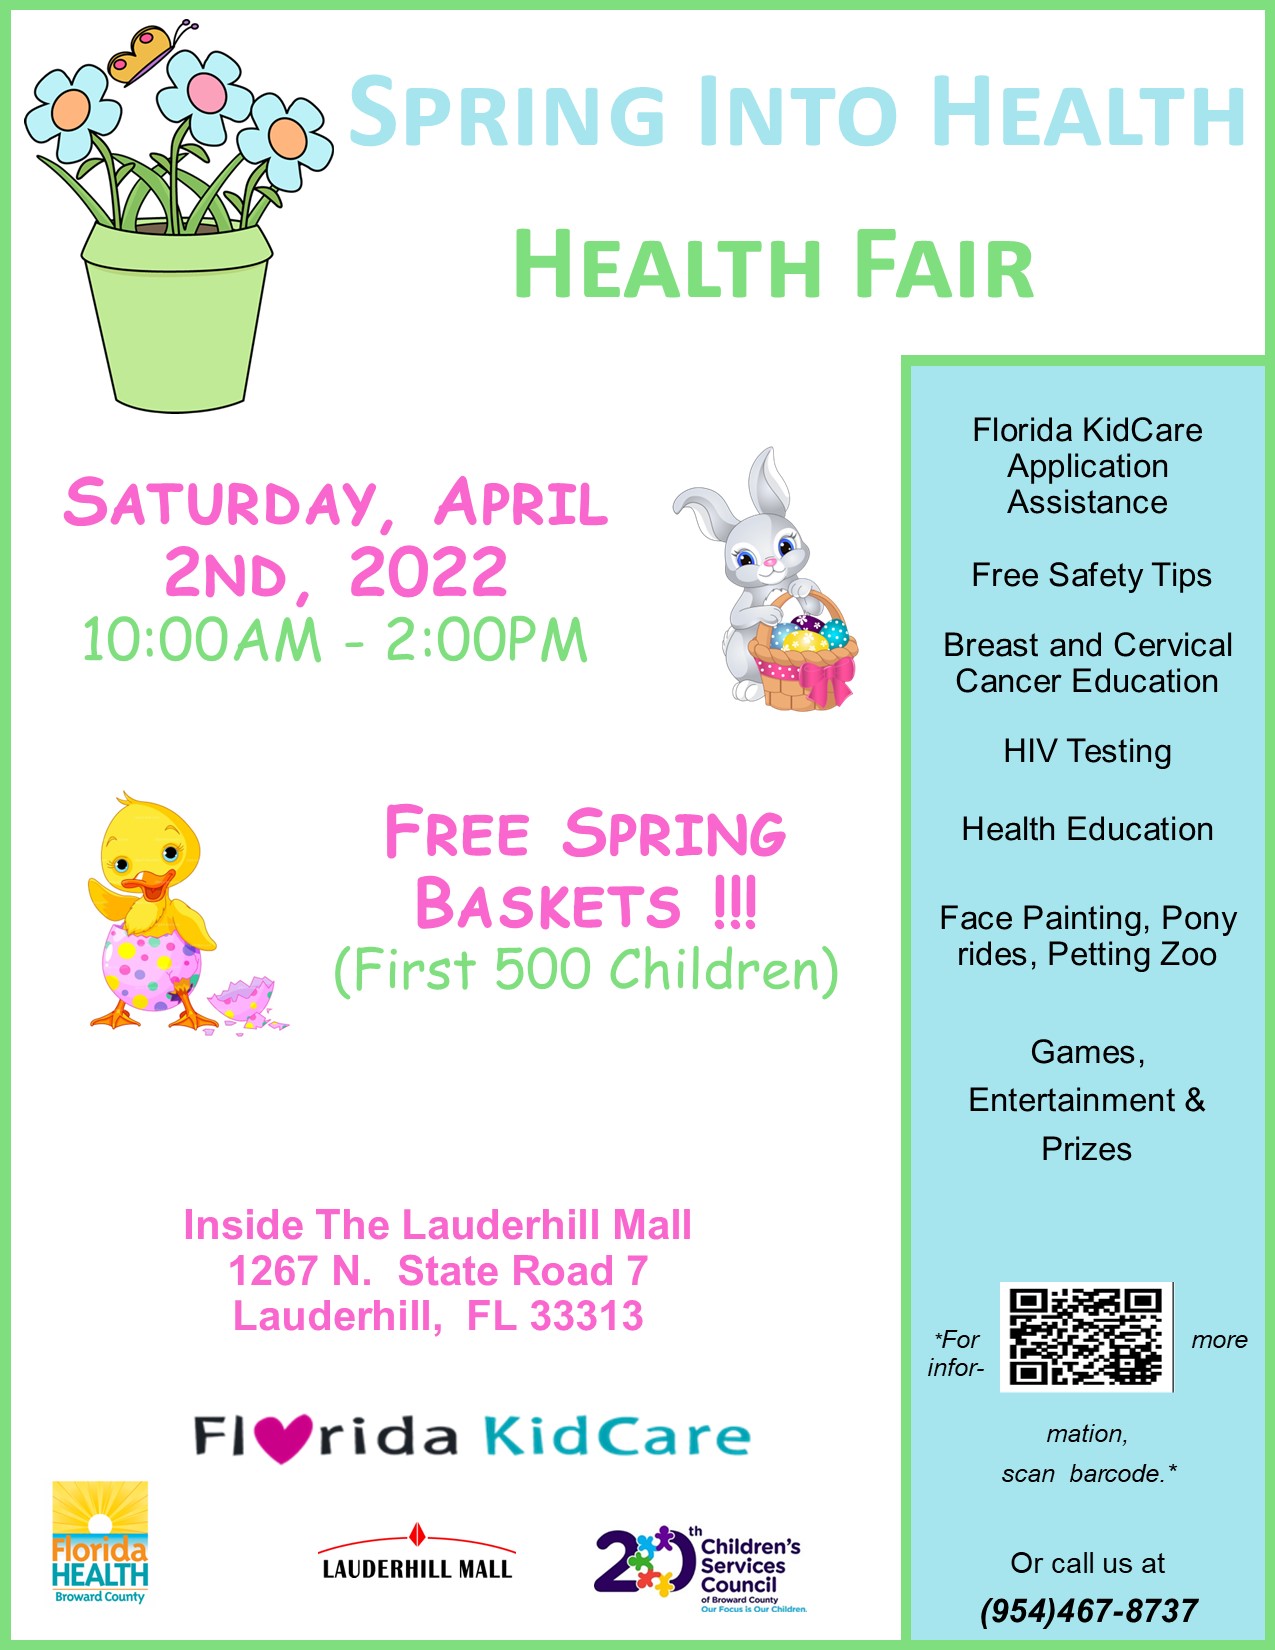 Flyer_Spring_Into_Health_Fair_2022-without_FSF.jpg